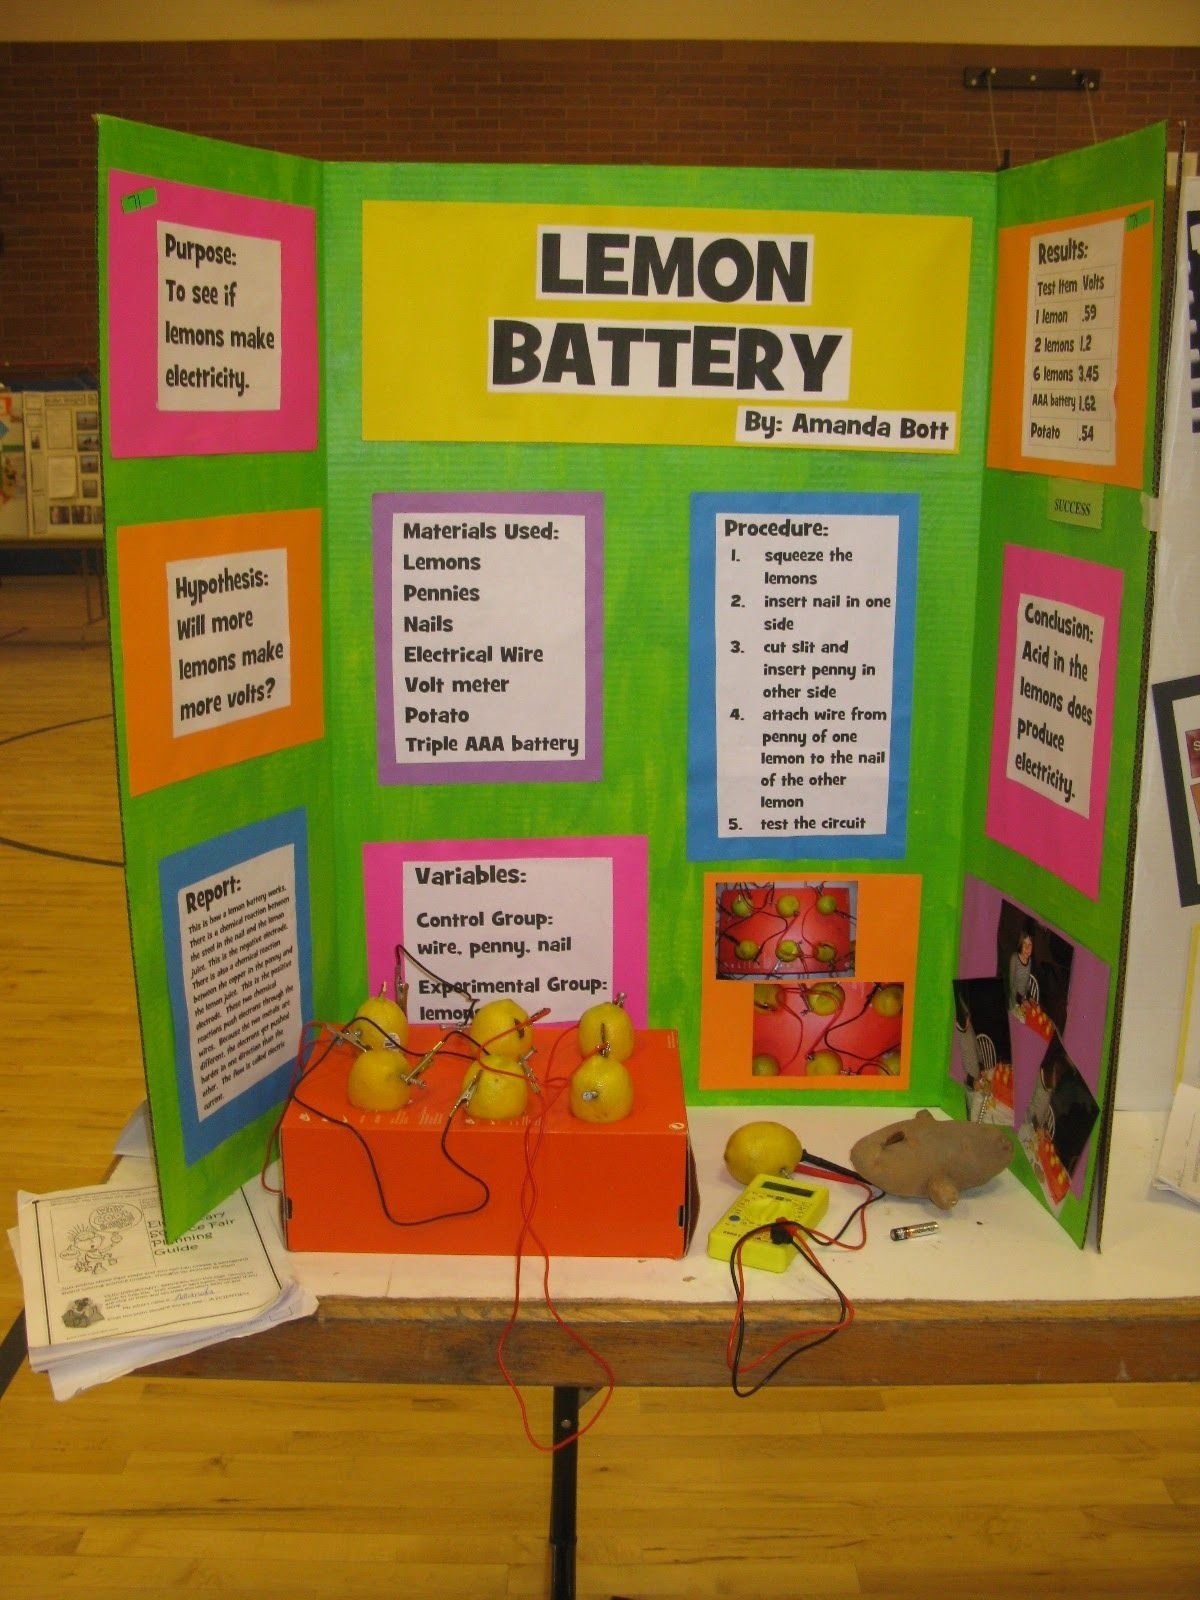 10 Trendy 3Rd Grade Science Projects Ideas the science of my life updated declo science fair with newspaper 61 2022